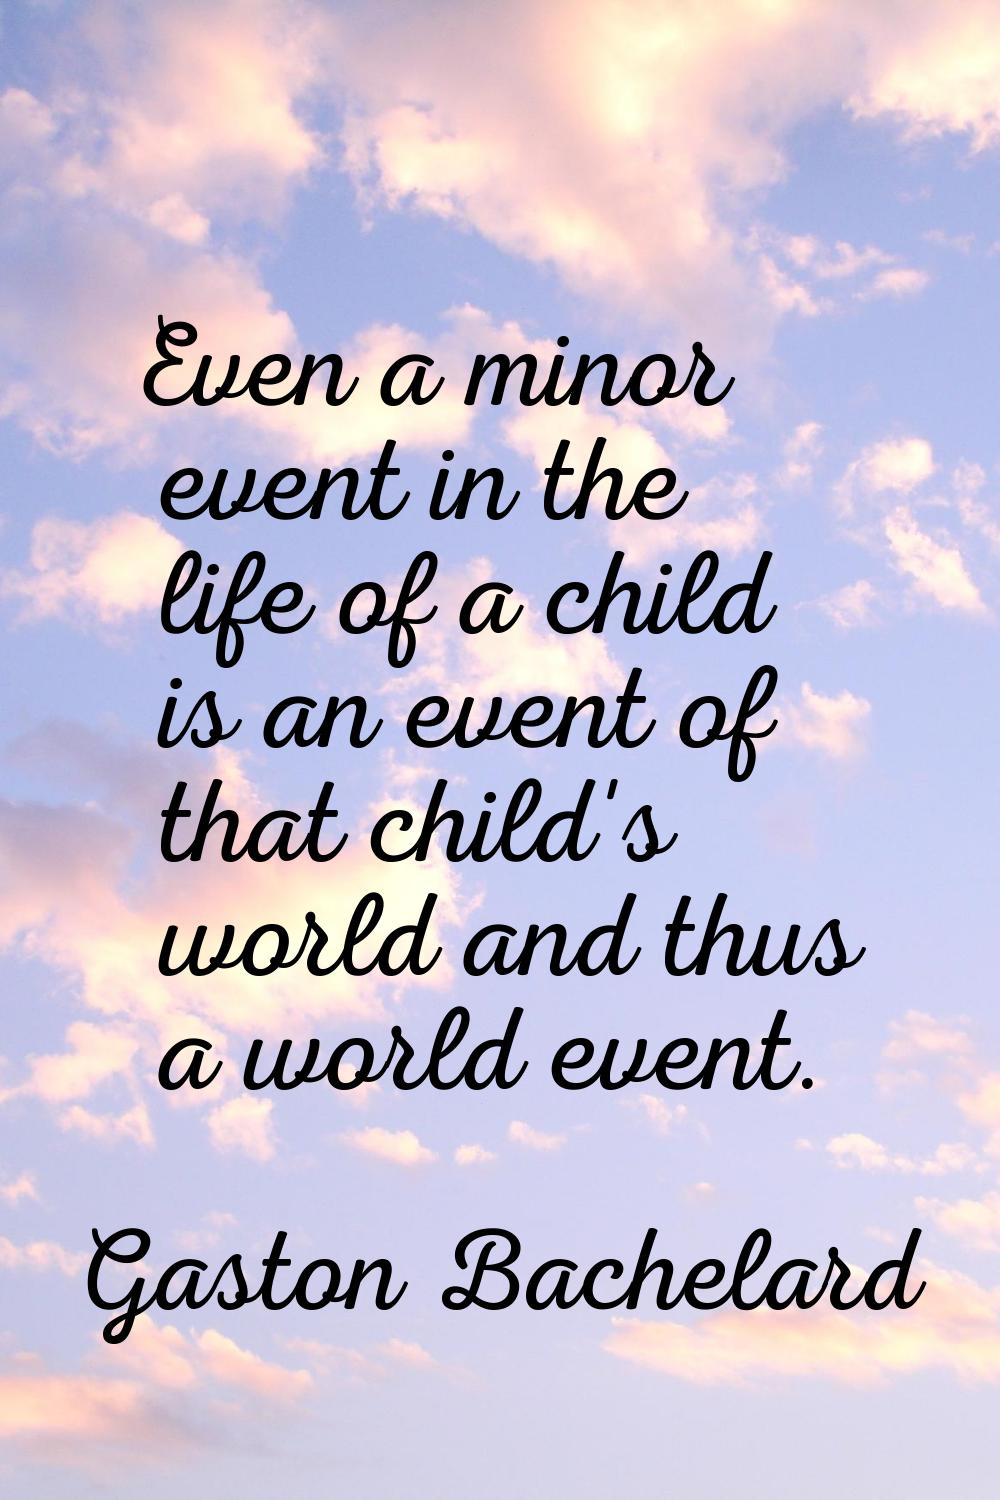 Even a minor event in the life of a child is an event of that child's world and thus a world event.